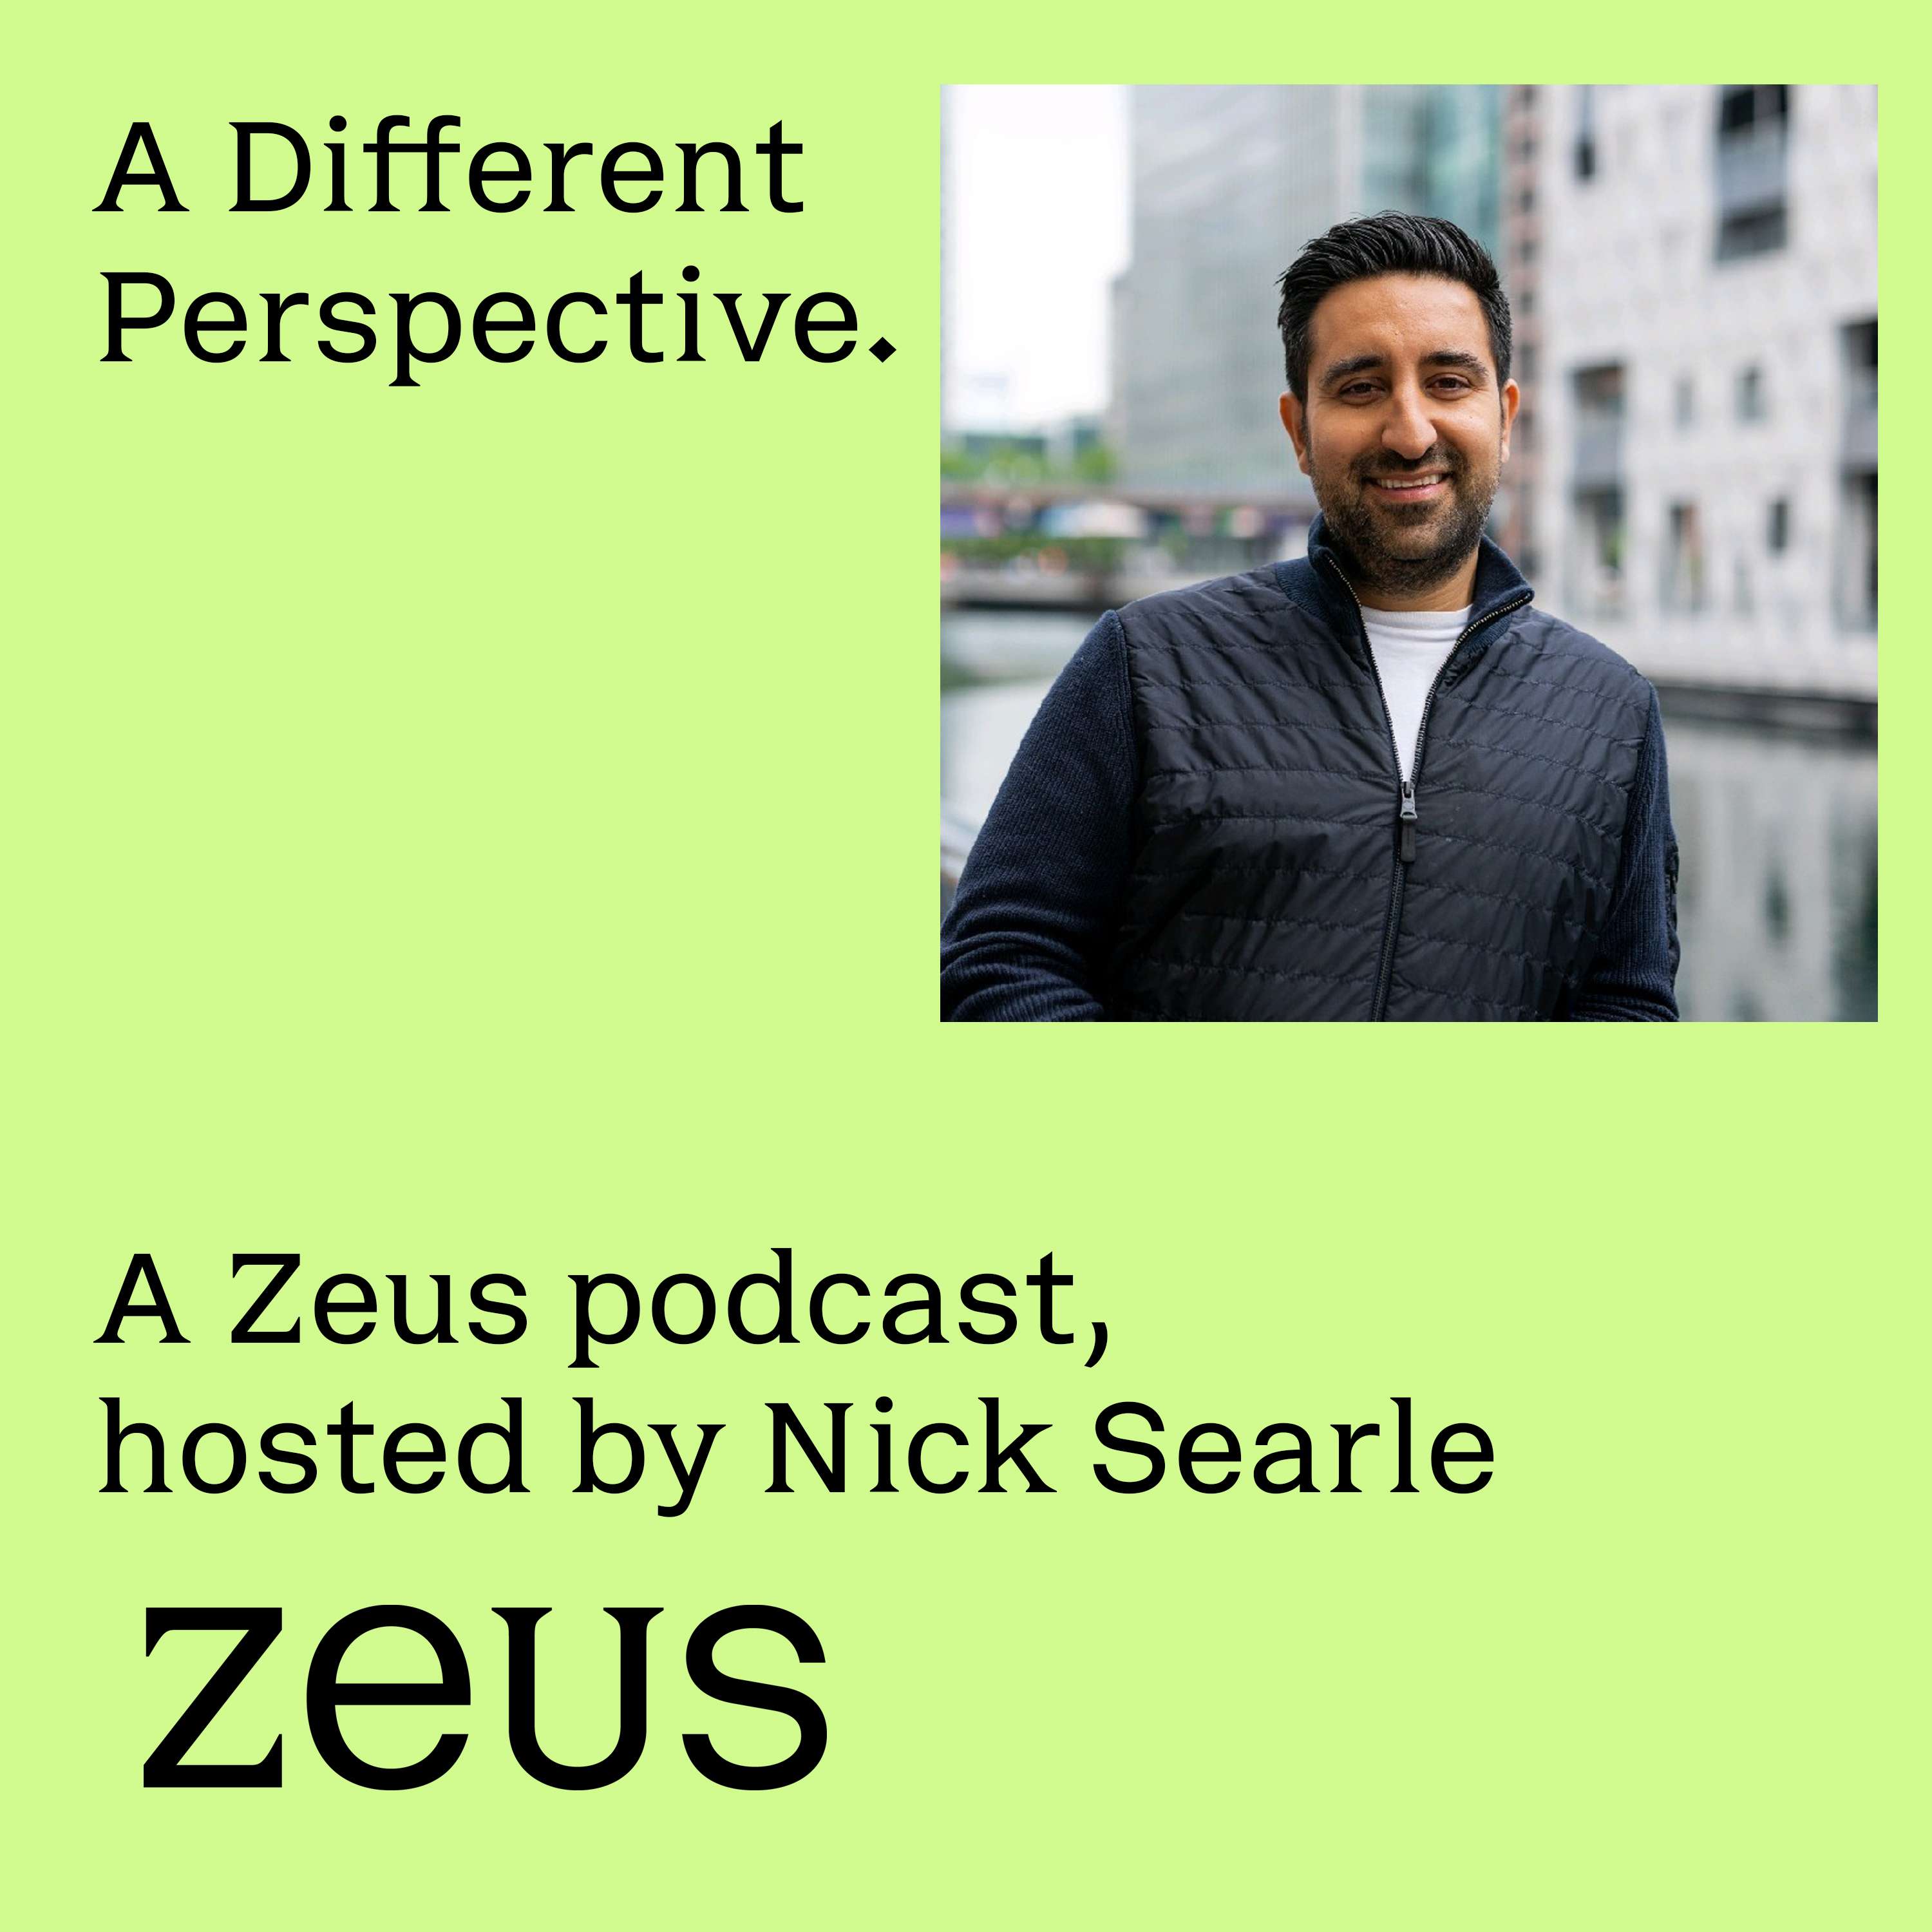 A Different Perspective with Houman Ashrafzadeh, Co-Founder of Urban Greens and Founder of Padium